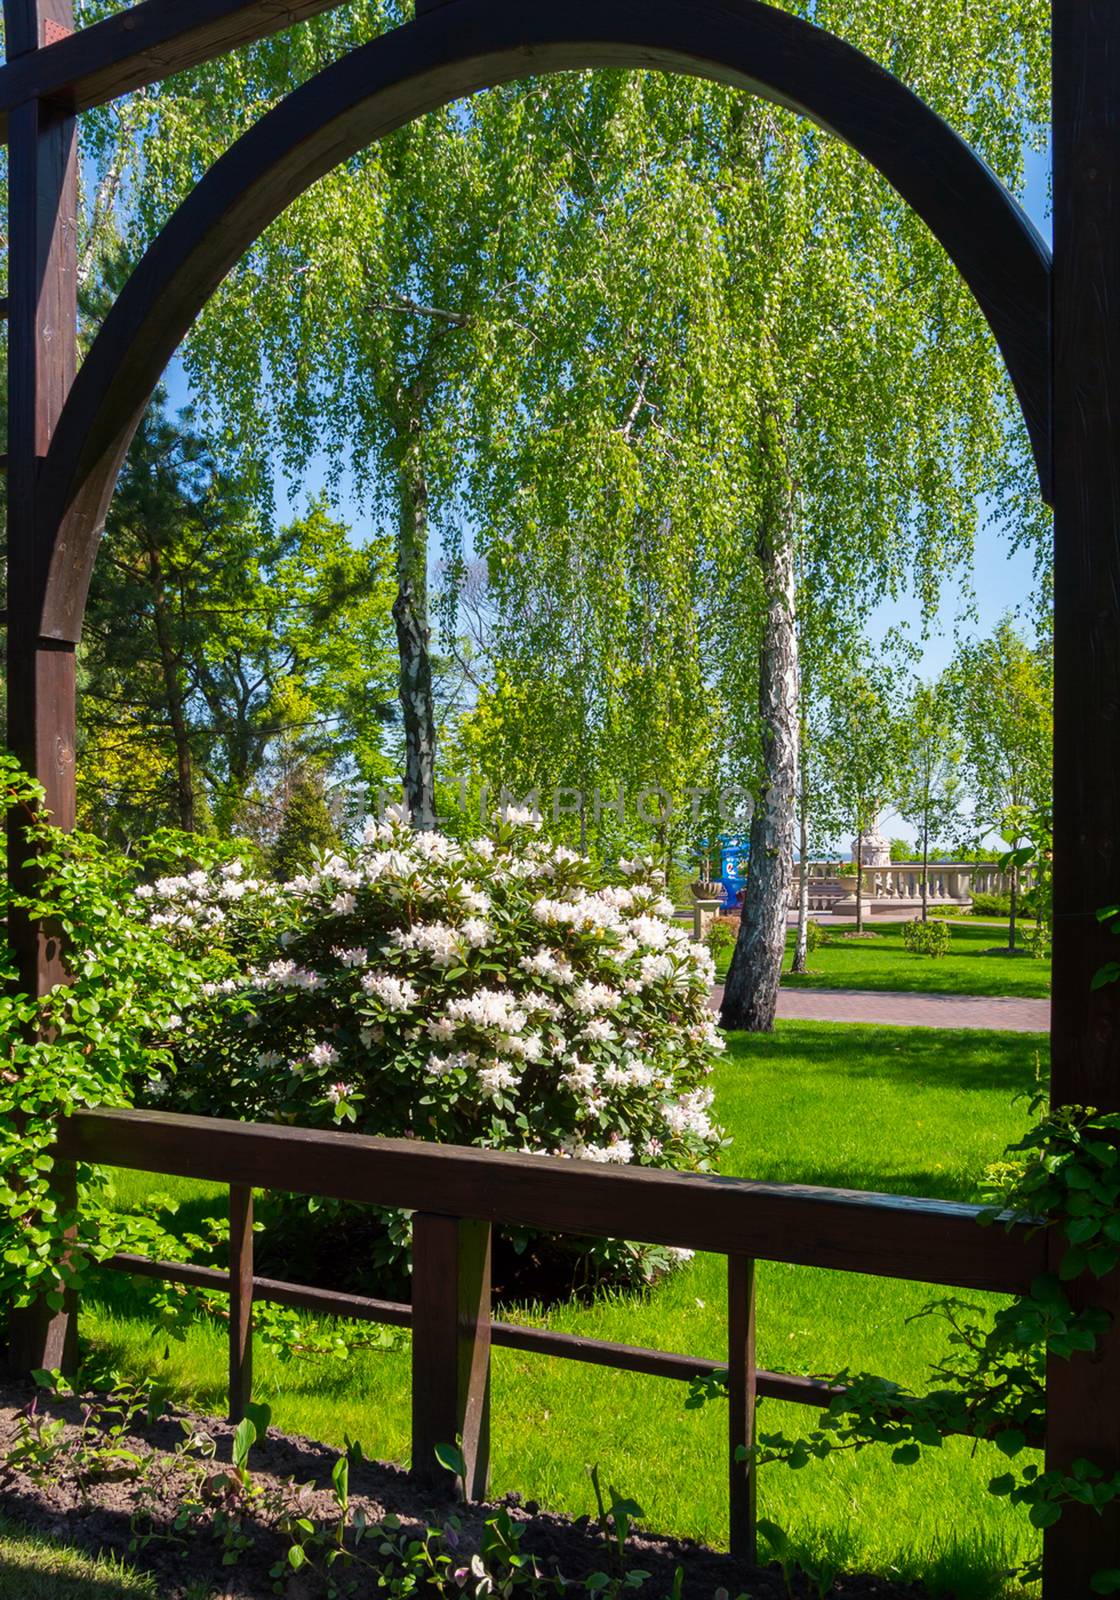 Fence with a small arch leading to a green garden with flowering by Adamchuk